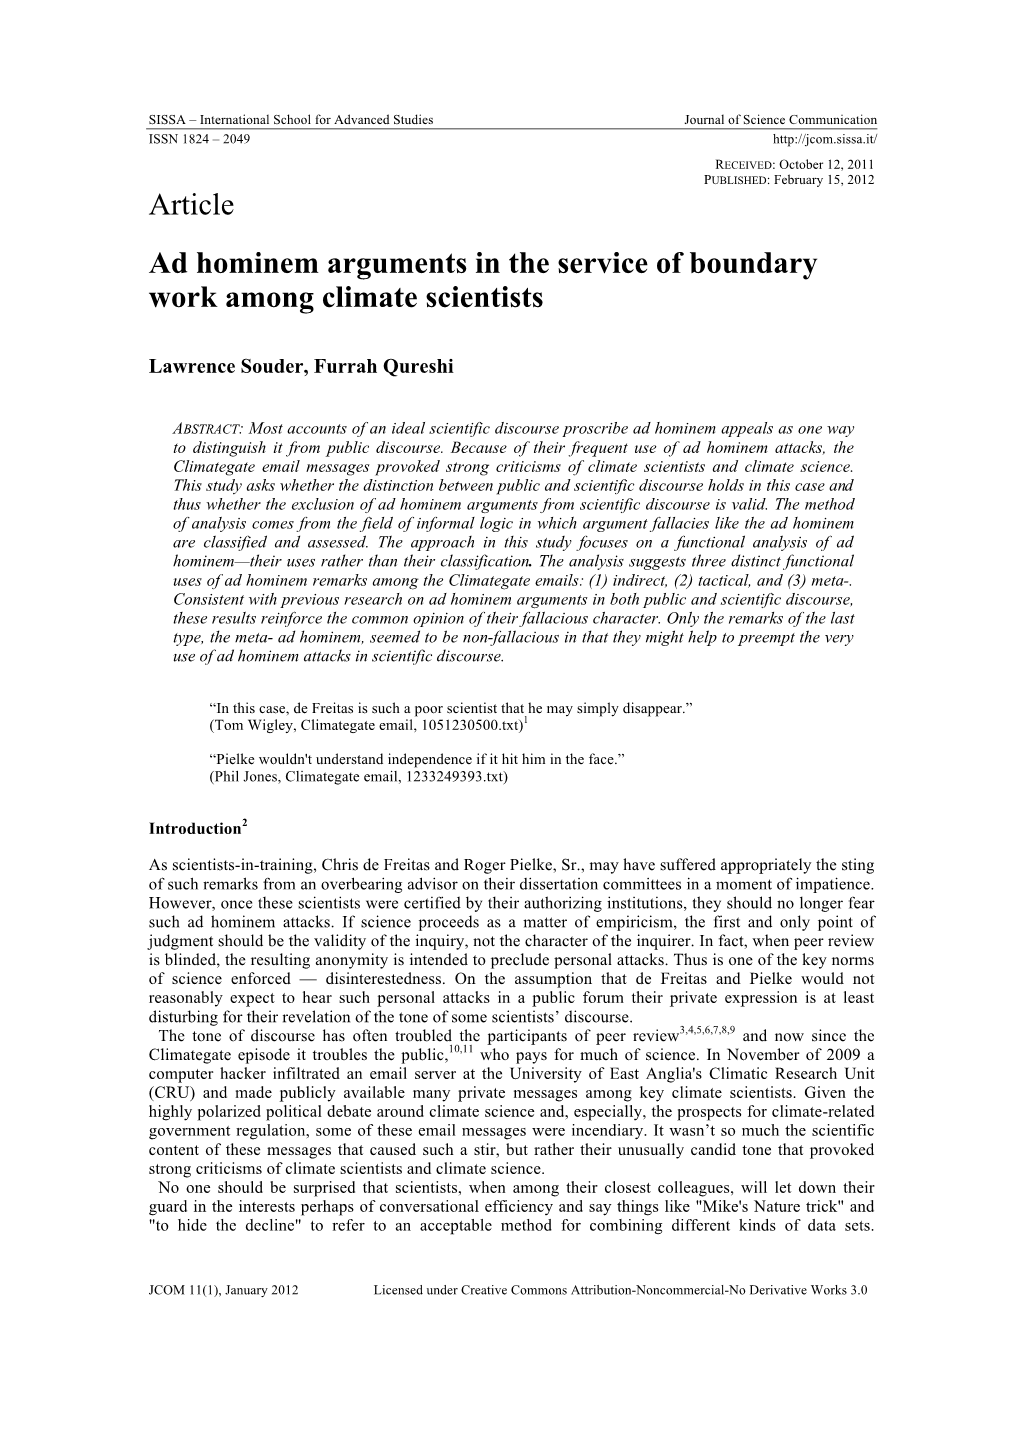 Ad Hominem Arguments in the Service of Boundary Work Among Climate Scientists